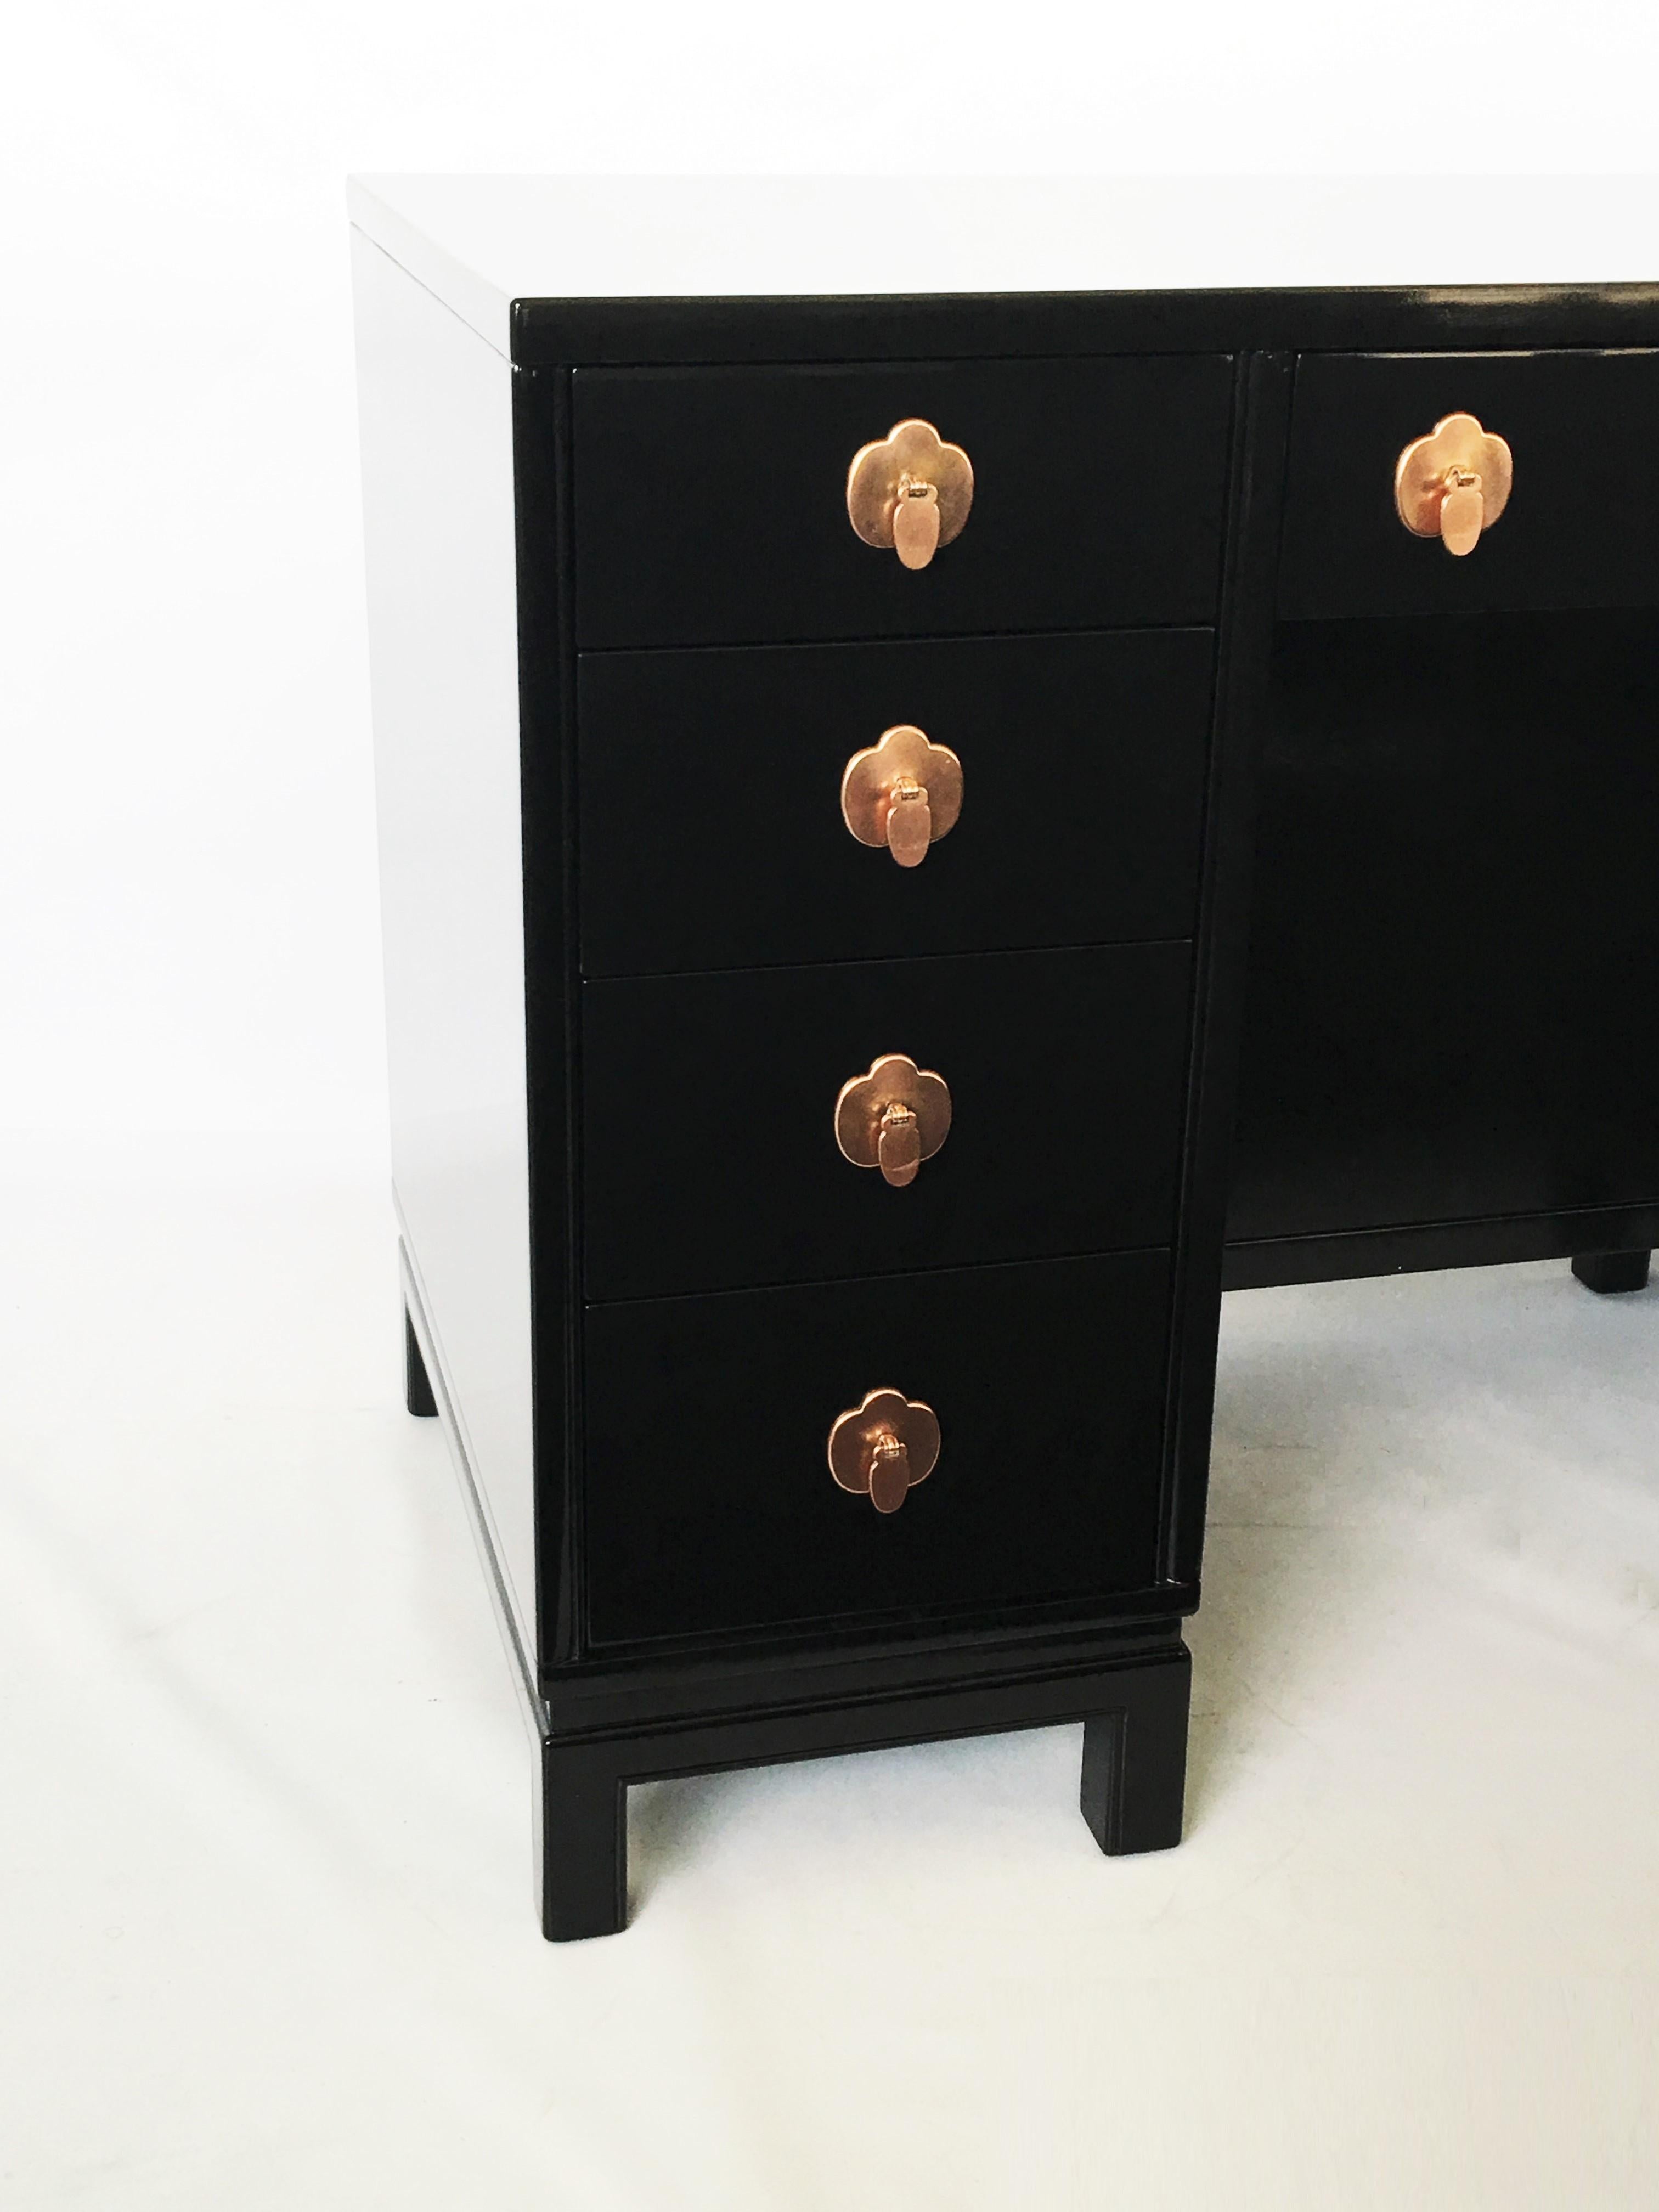 Asian style eight-drawer desk manufactured by Landstrom Furniture of Rockford, Illinois. Perfectly proportioned desk in black lacquer finish, chinoiserie styling with aged copper drop disc pulls and trefoil escutcheons on platform style four leg